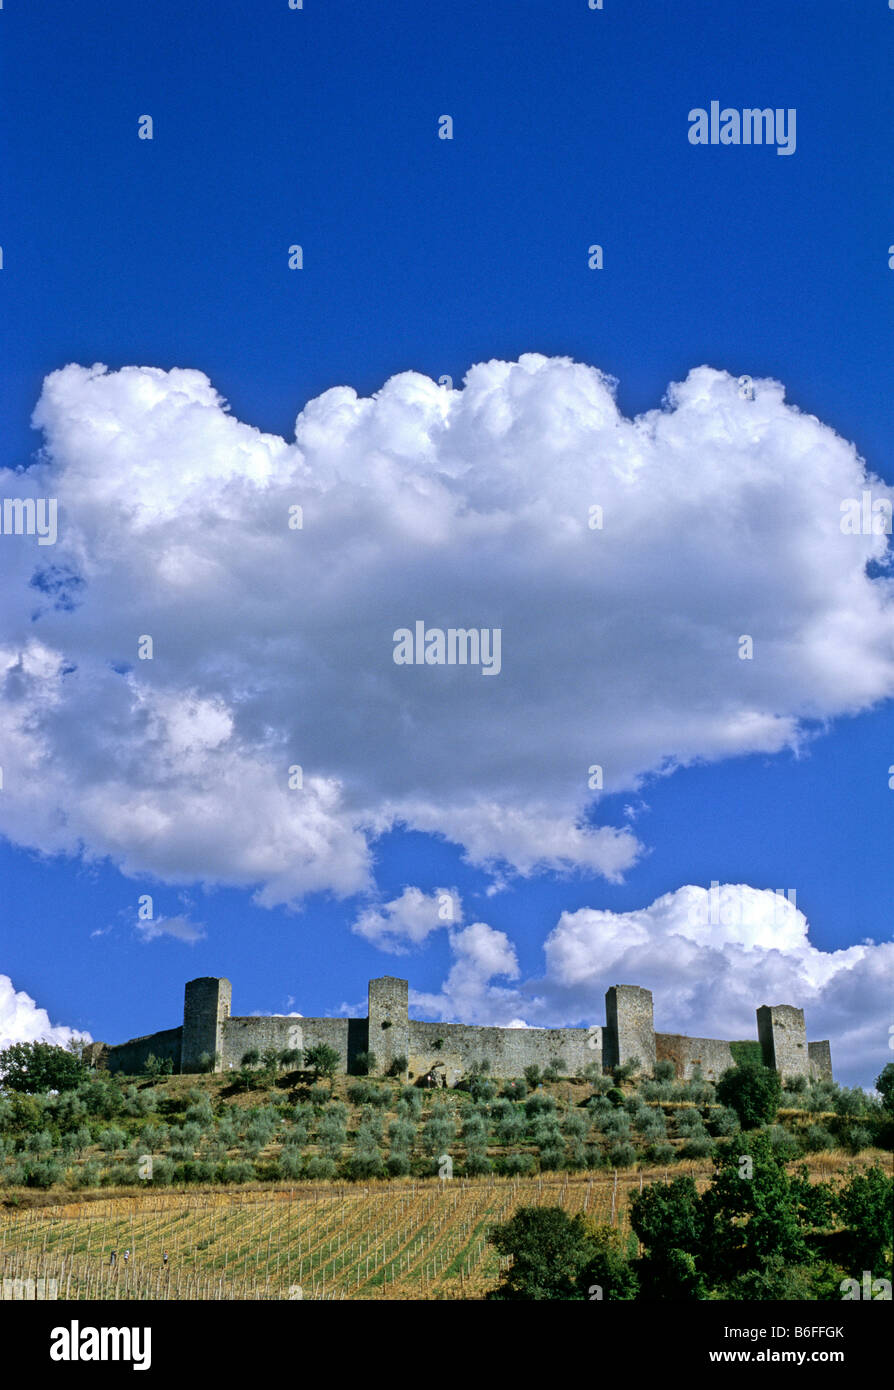 Walled medieval town, Monteriggioni, Province of Siena, Tuscany, Italy, Europe Stock Photo